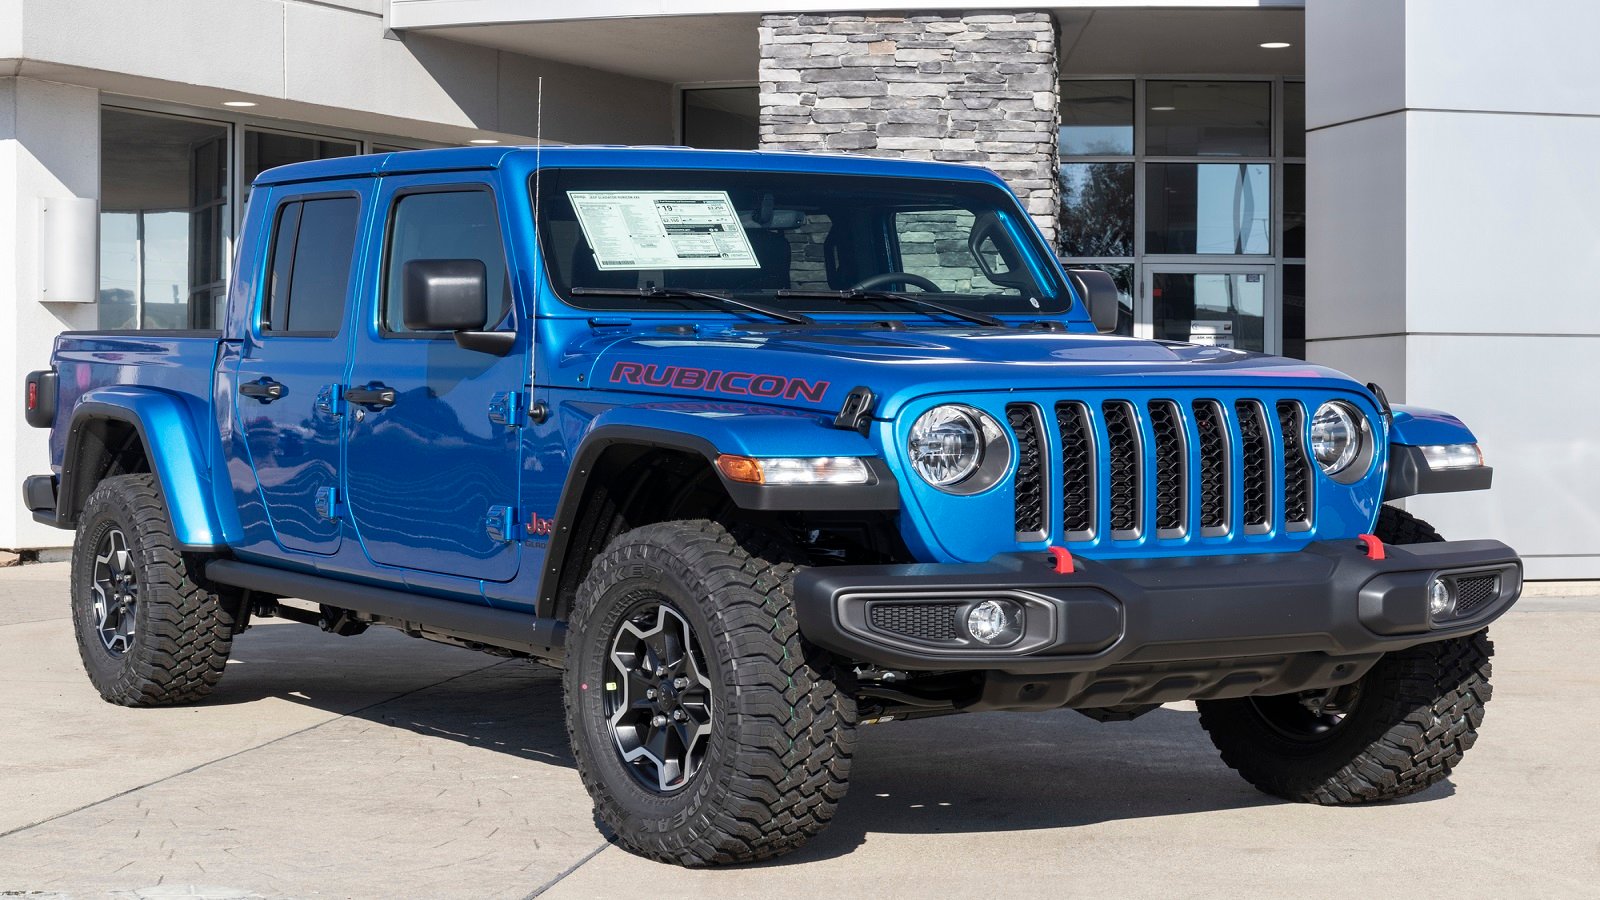 <p>The Jeep Wrangler has been a popular choice for off-road enthusiasts, but it may not be the best option for everyone in 2024:</p><ul> <li><strong>Fuel Efficiency</strong>: The Jeep Wrangler’s fuel consumption is known to be relatively high. This could lead to increased expenses in the long run for potential buyers, especially with rising fuel prices.</li> <li><strong>Ride Quality</strong>: While the Wrangler excels in off-road conditions, its on-road performance might be subpar. The vehicle could be less comfortable compared to its rivals when driving on highways and urban areas.</li> <li><strong>Safety Features</strong>: The Jeep Wrangler might not be the best choice for those who prioritize safety features, such as advanced driver assistance systems and collision avoidance technologies, which are becoming increasingly important in modern cars.</li> <li><strong>Price</strong>: The base price of the Jeep Wrangler can be relatively expensive compared to other vehicles in its segment, making it less budget-friendly for certain buyers.</li> </ul>